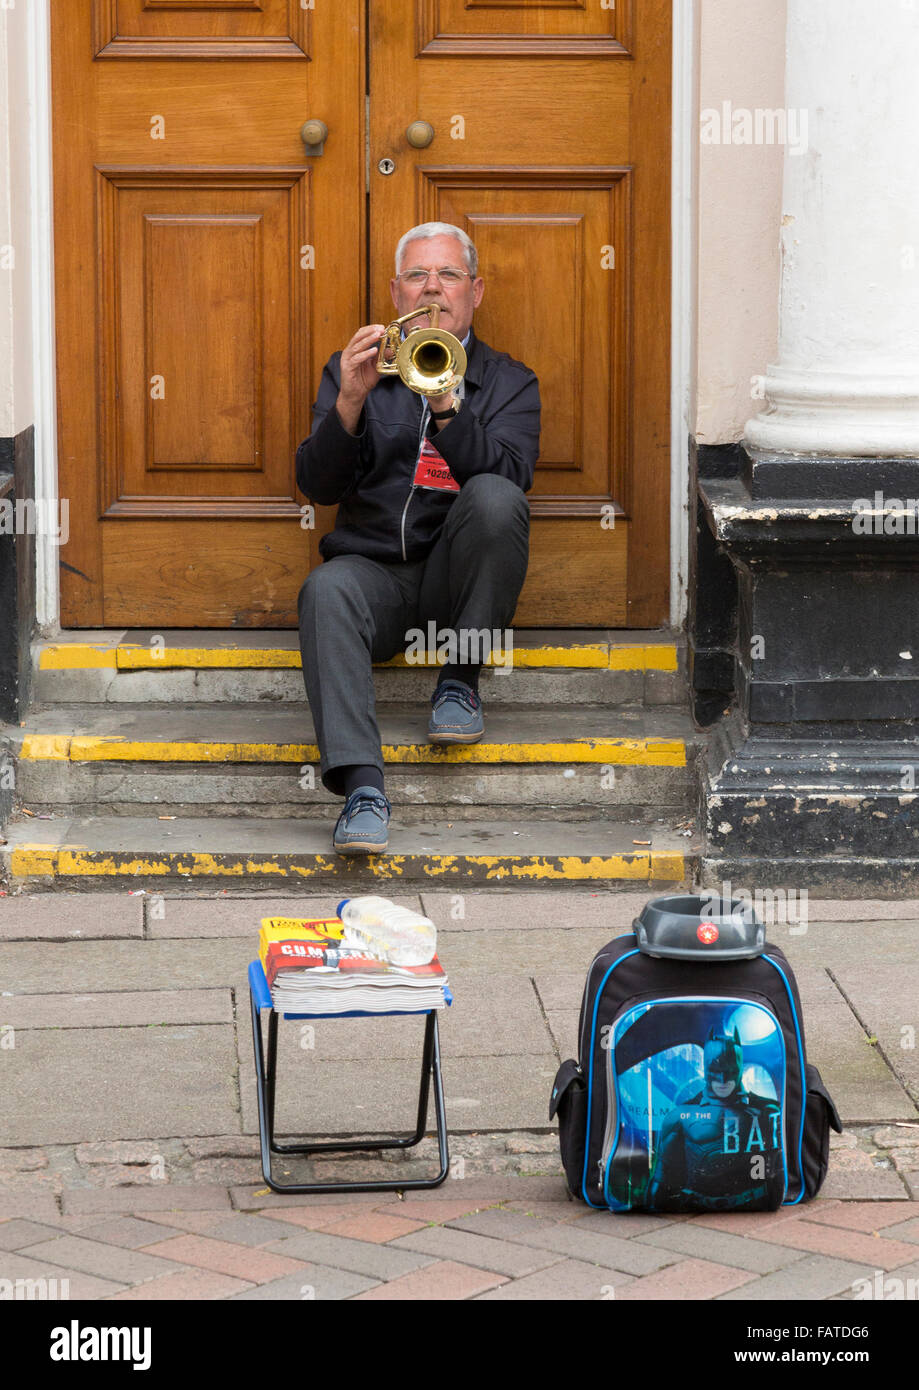 male playing a trumpet in the street Stock Photo